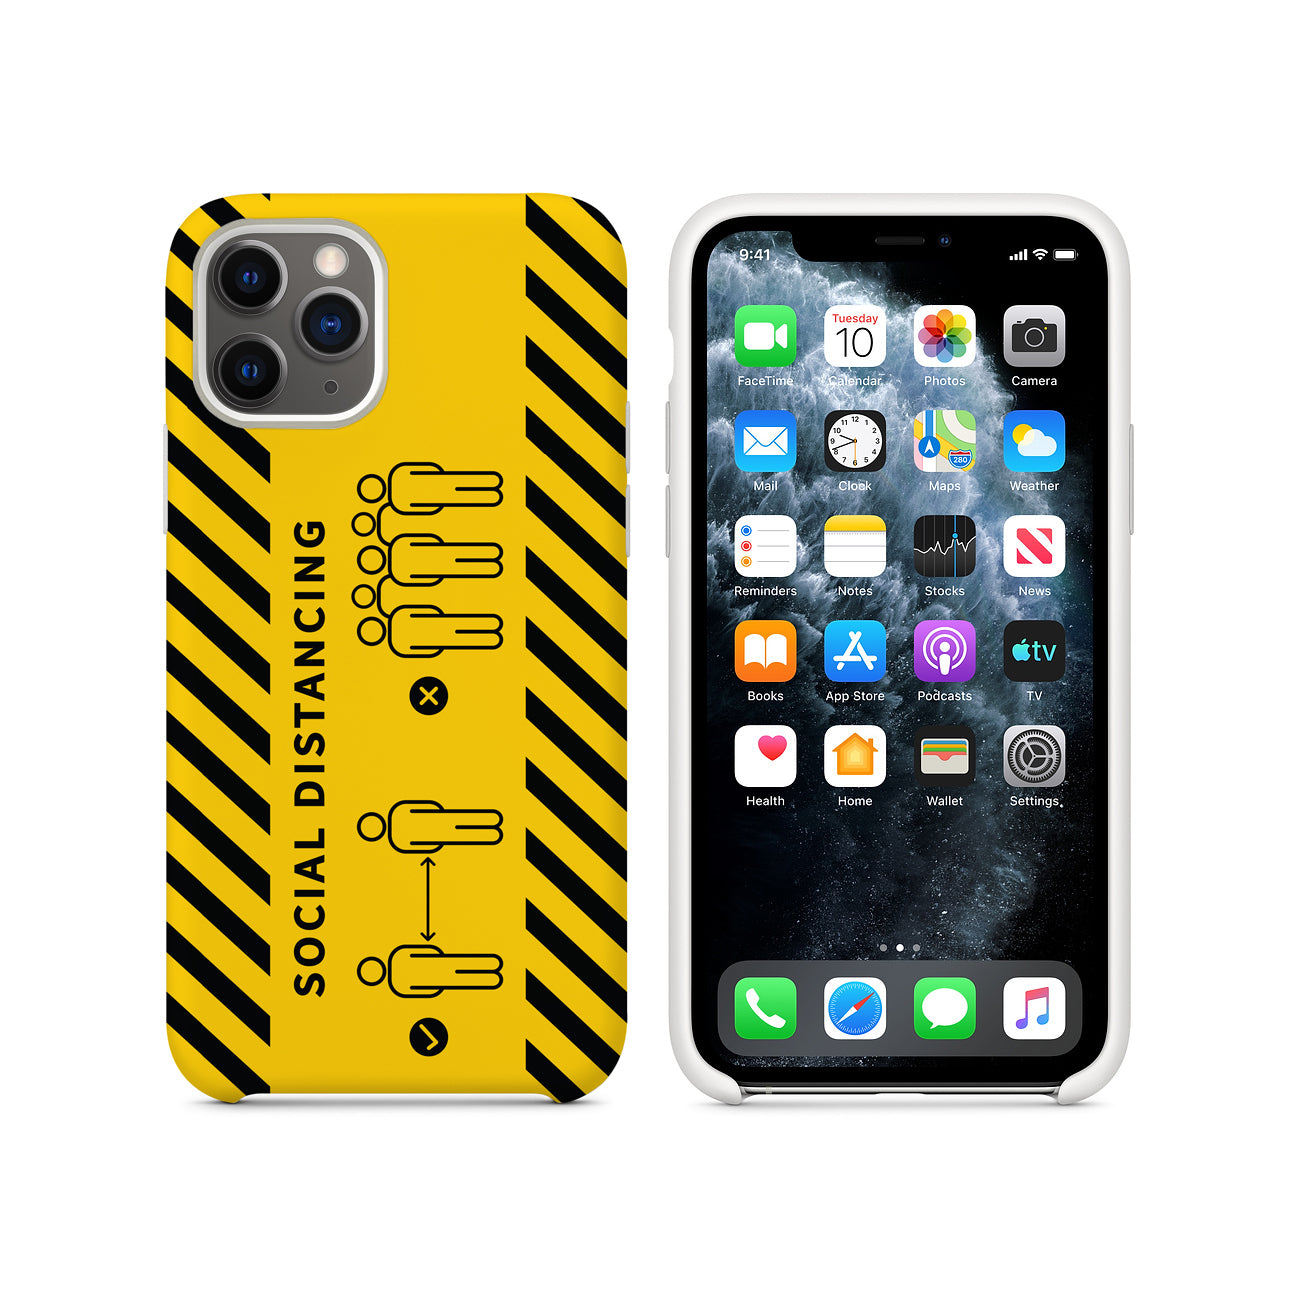 Eagle Design Case For APPLE IPHONE 11 PRO In Mix